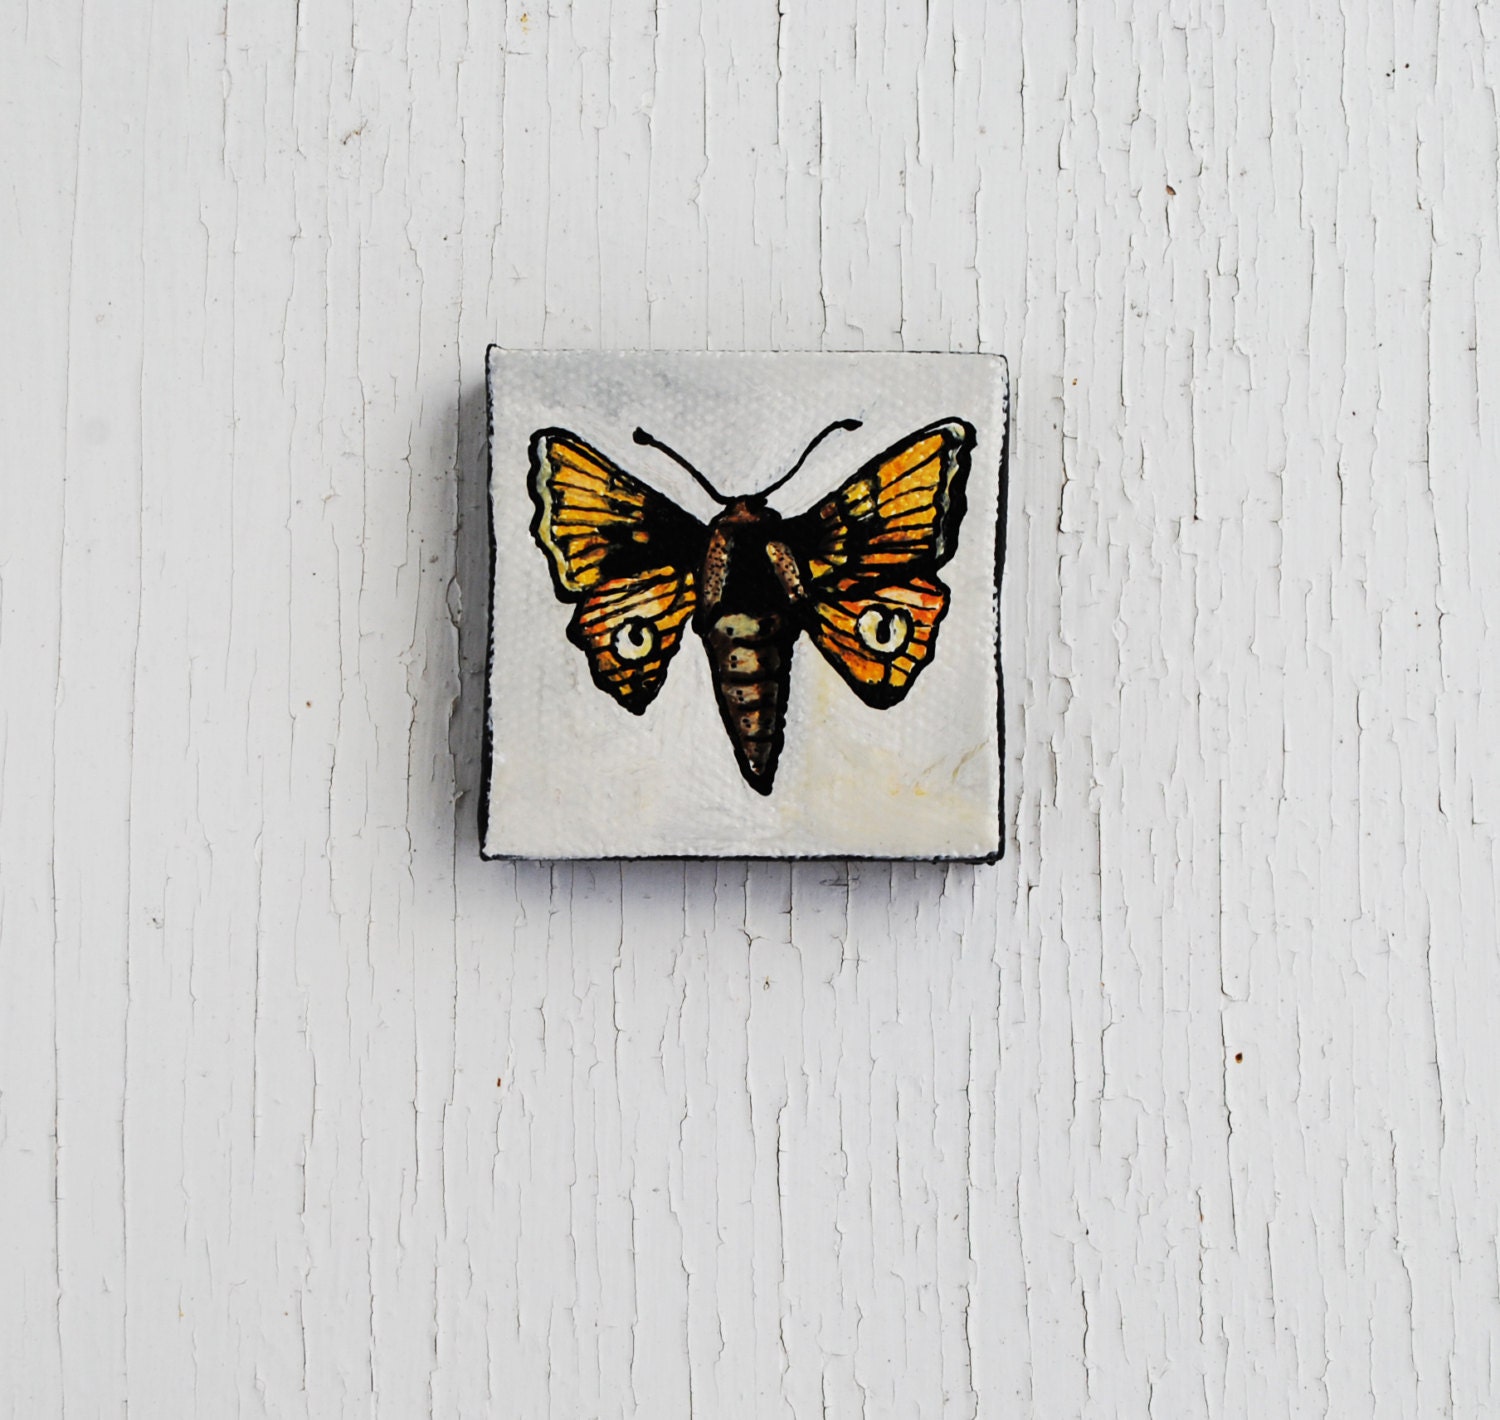 Tiny Moth Painting.  Tiny Art.  Original Oil Painting.  Insect. Nature.  Spring. - SorchaMoon